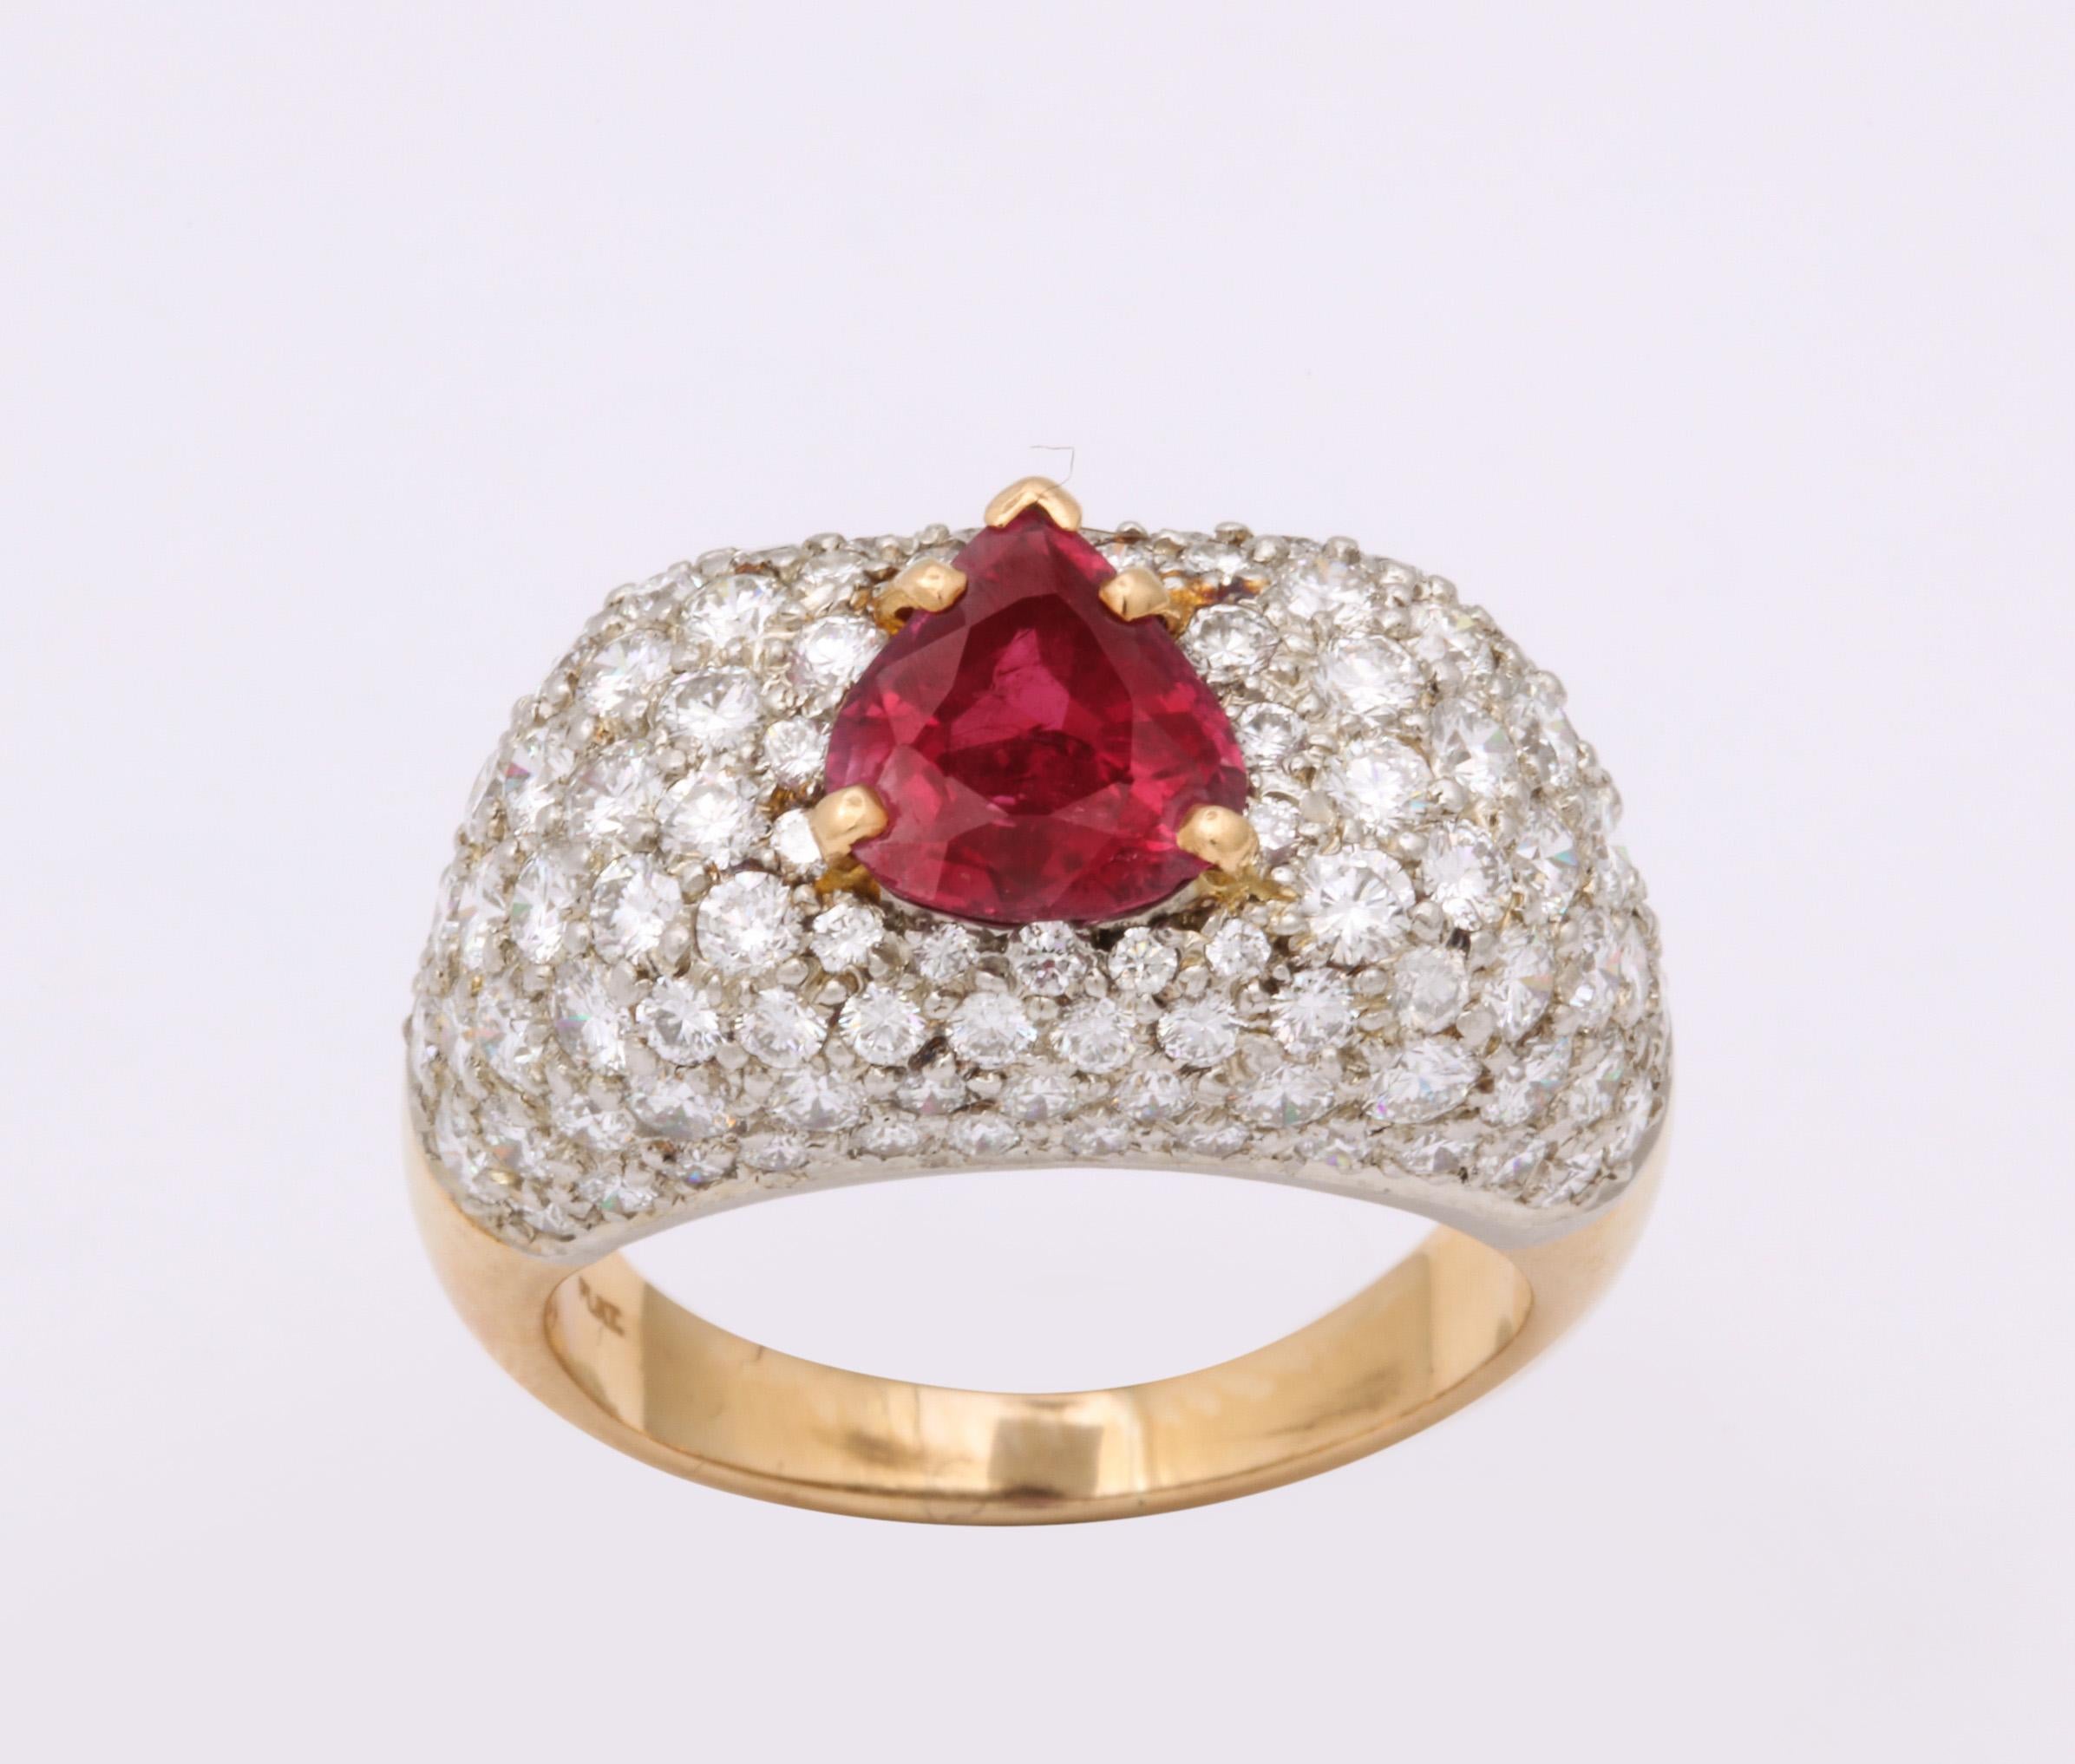 One Ladies Dinner Ring Centering A 2.10 Carat Pear Shaped Faceted Prong Set Ruby. Cocktail Ring Is Further Embellished With Five Carats Of Full Cut Brillant Cut Diamonds. Ring Set In 14kt Yellow Gold And Diamonds Set In Platinum. Created In The